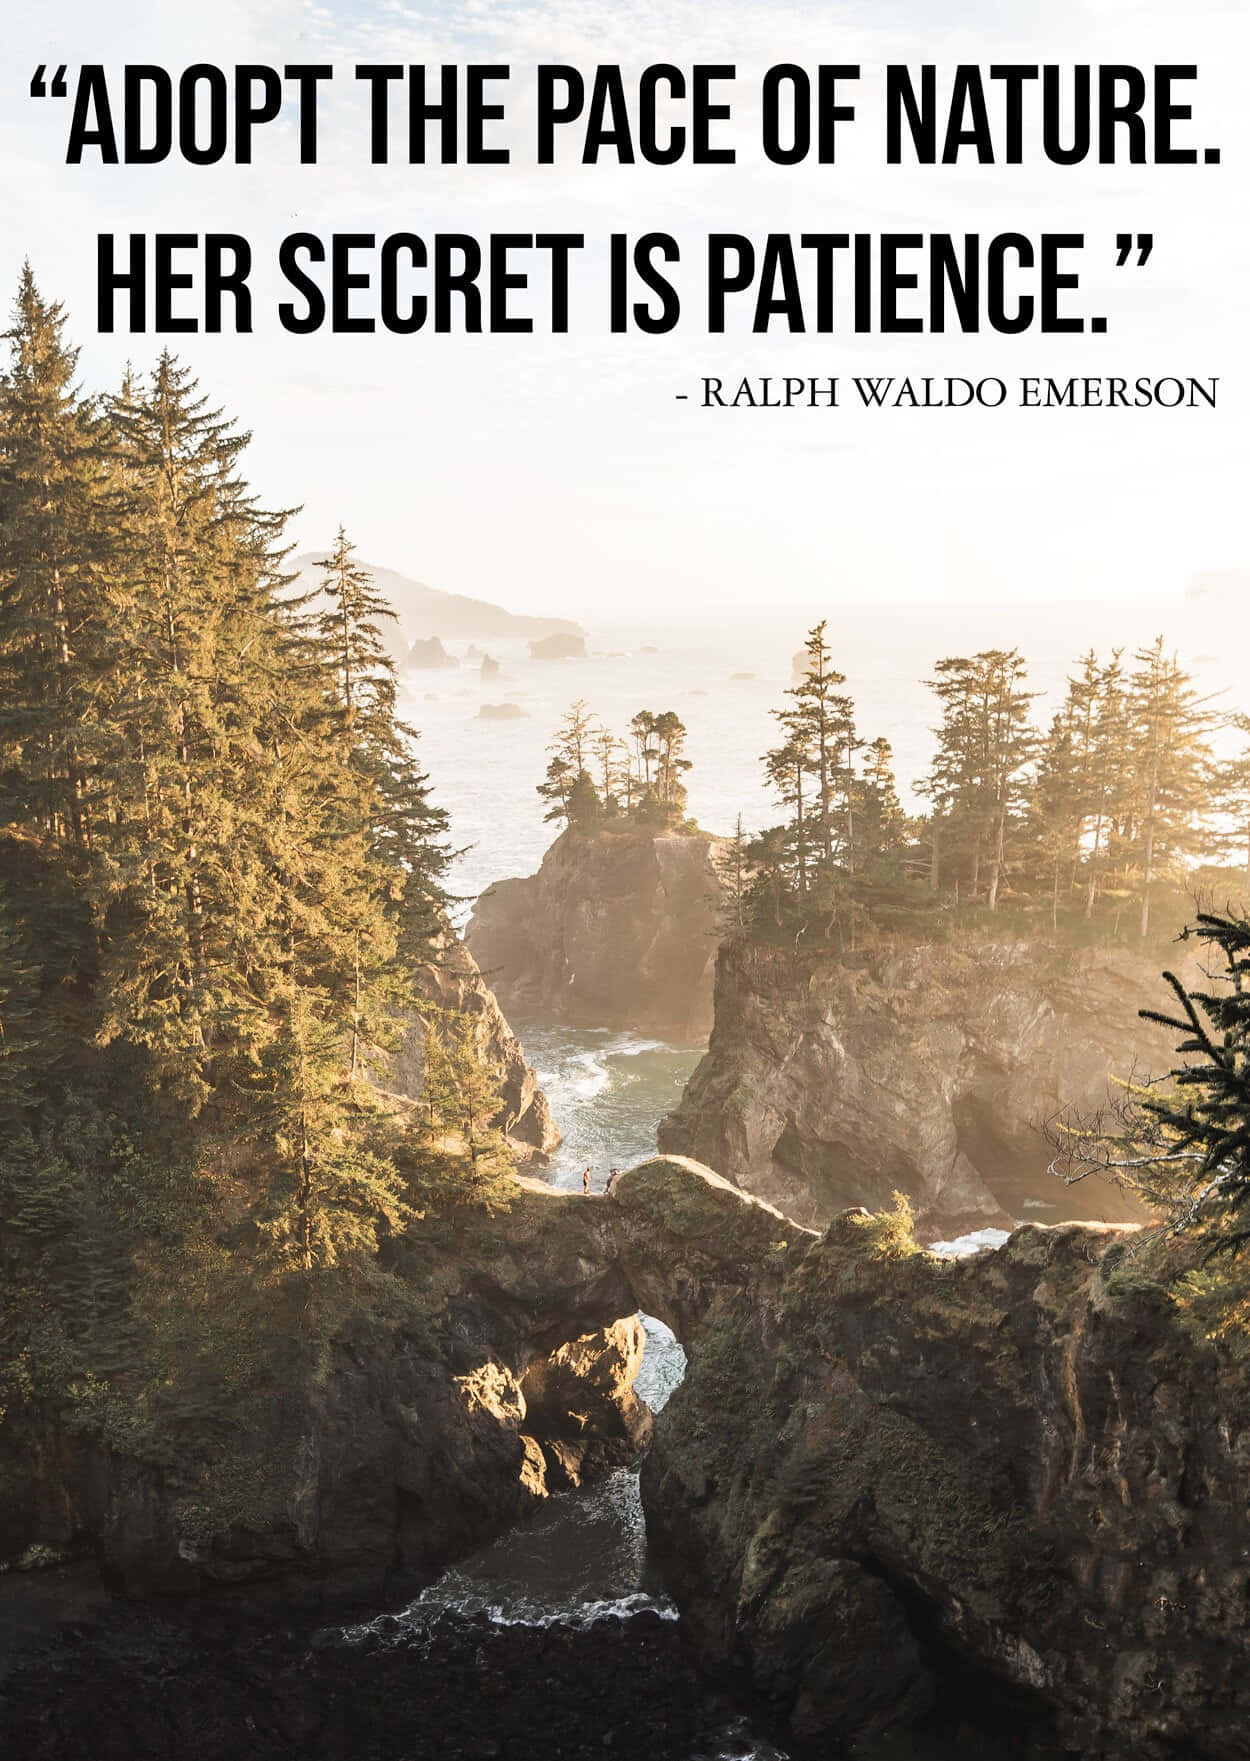 Emerson Nature Patience Quote Wallpaper